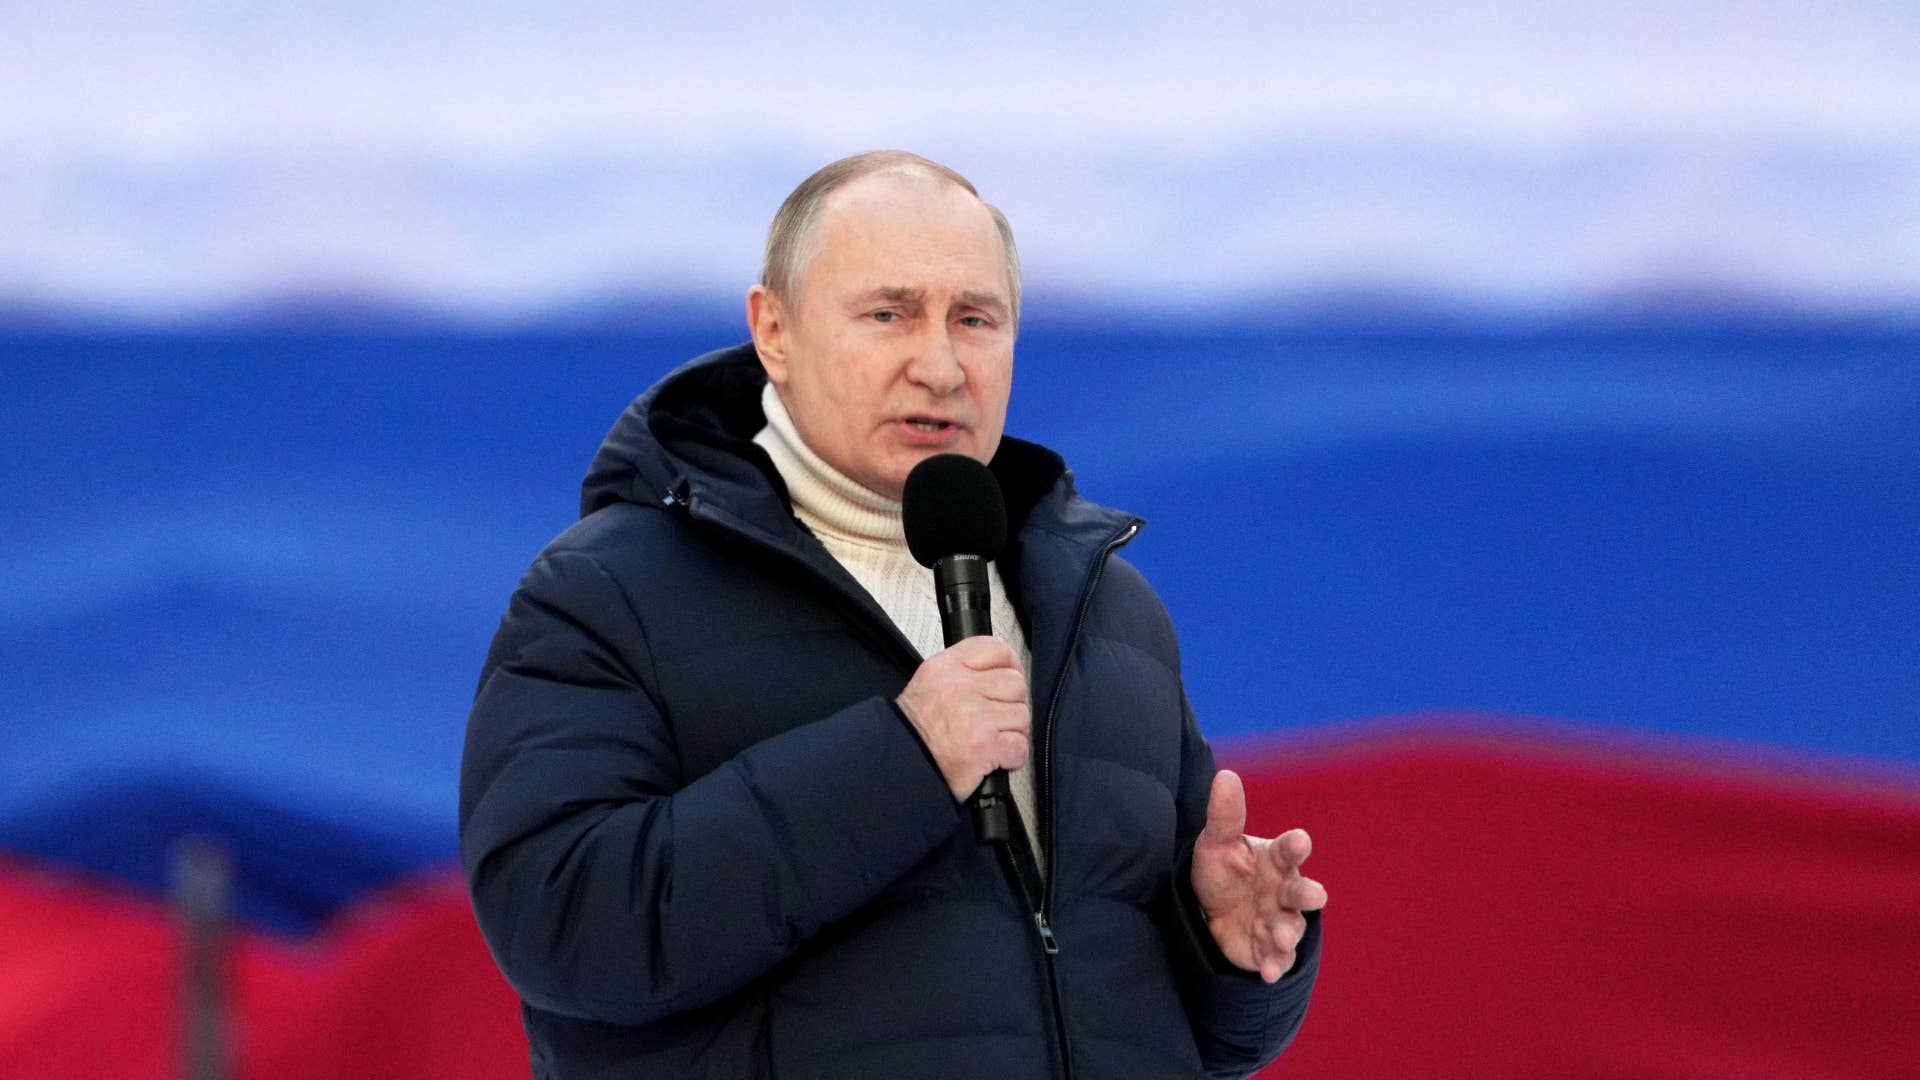 Vladimir Putin is pictured holding a microphone